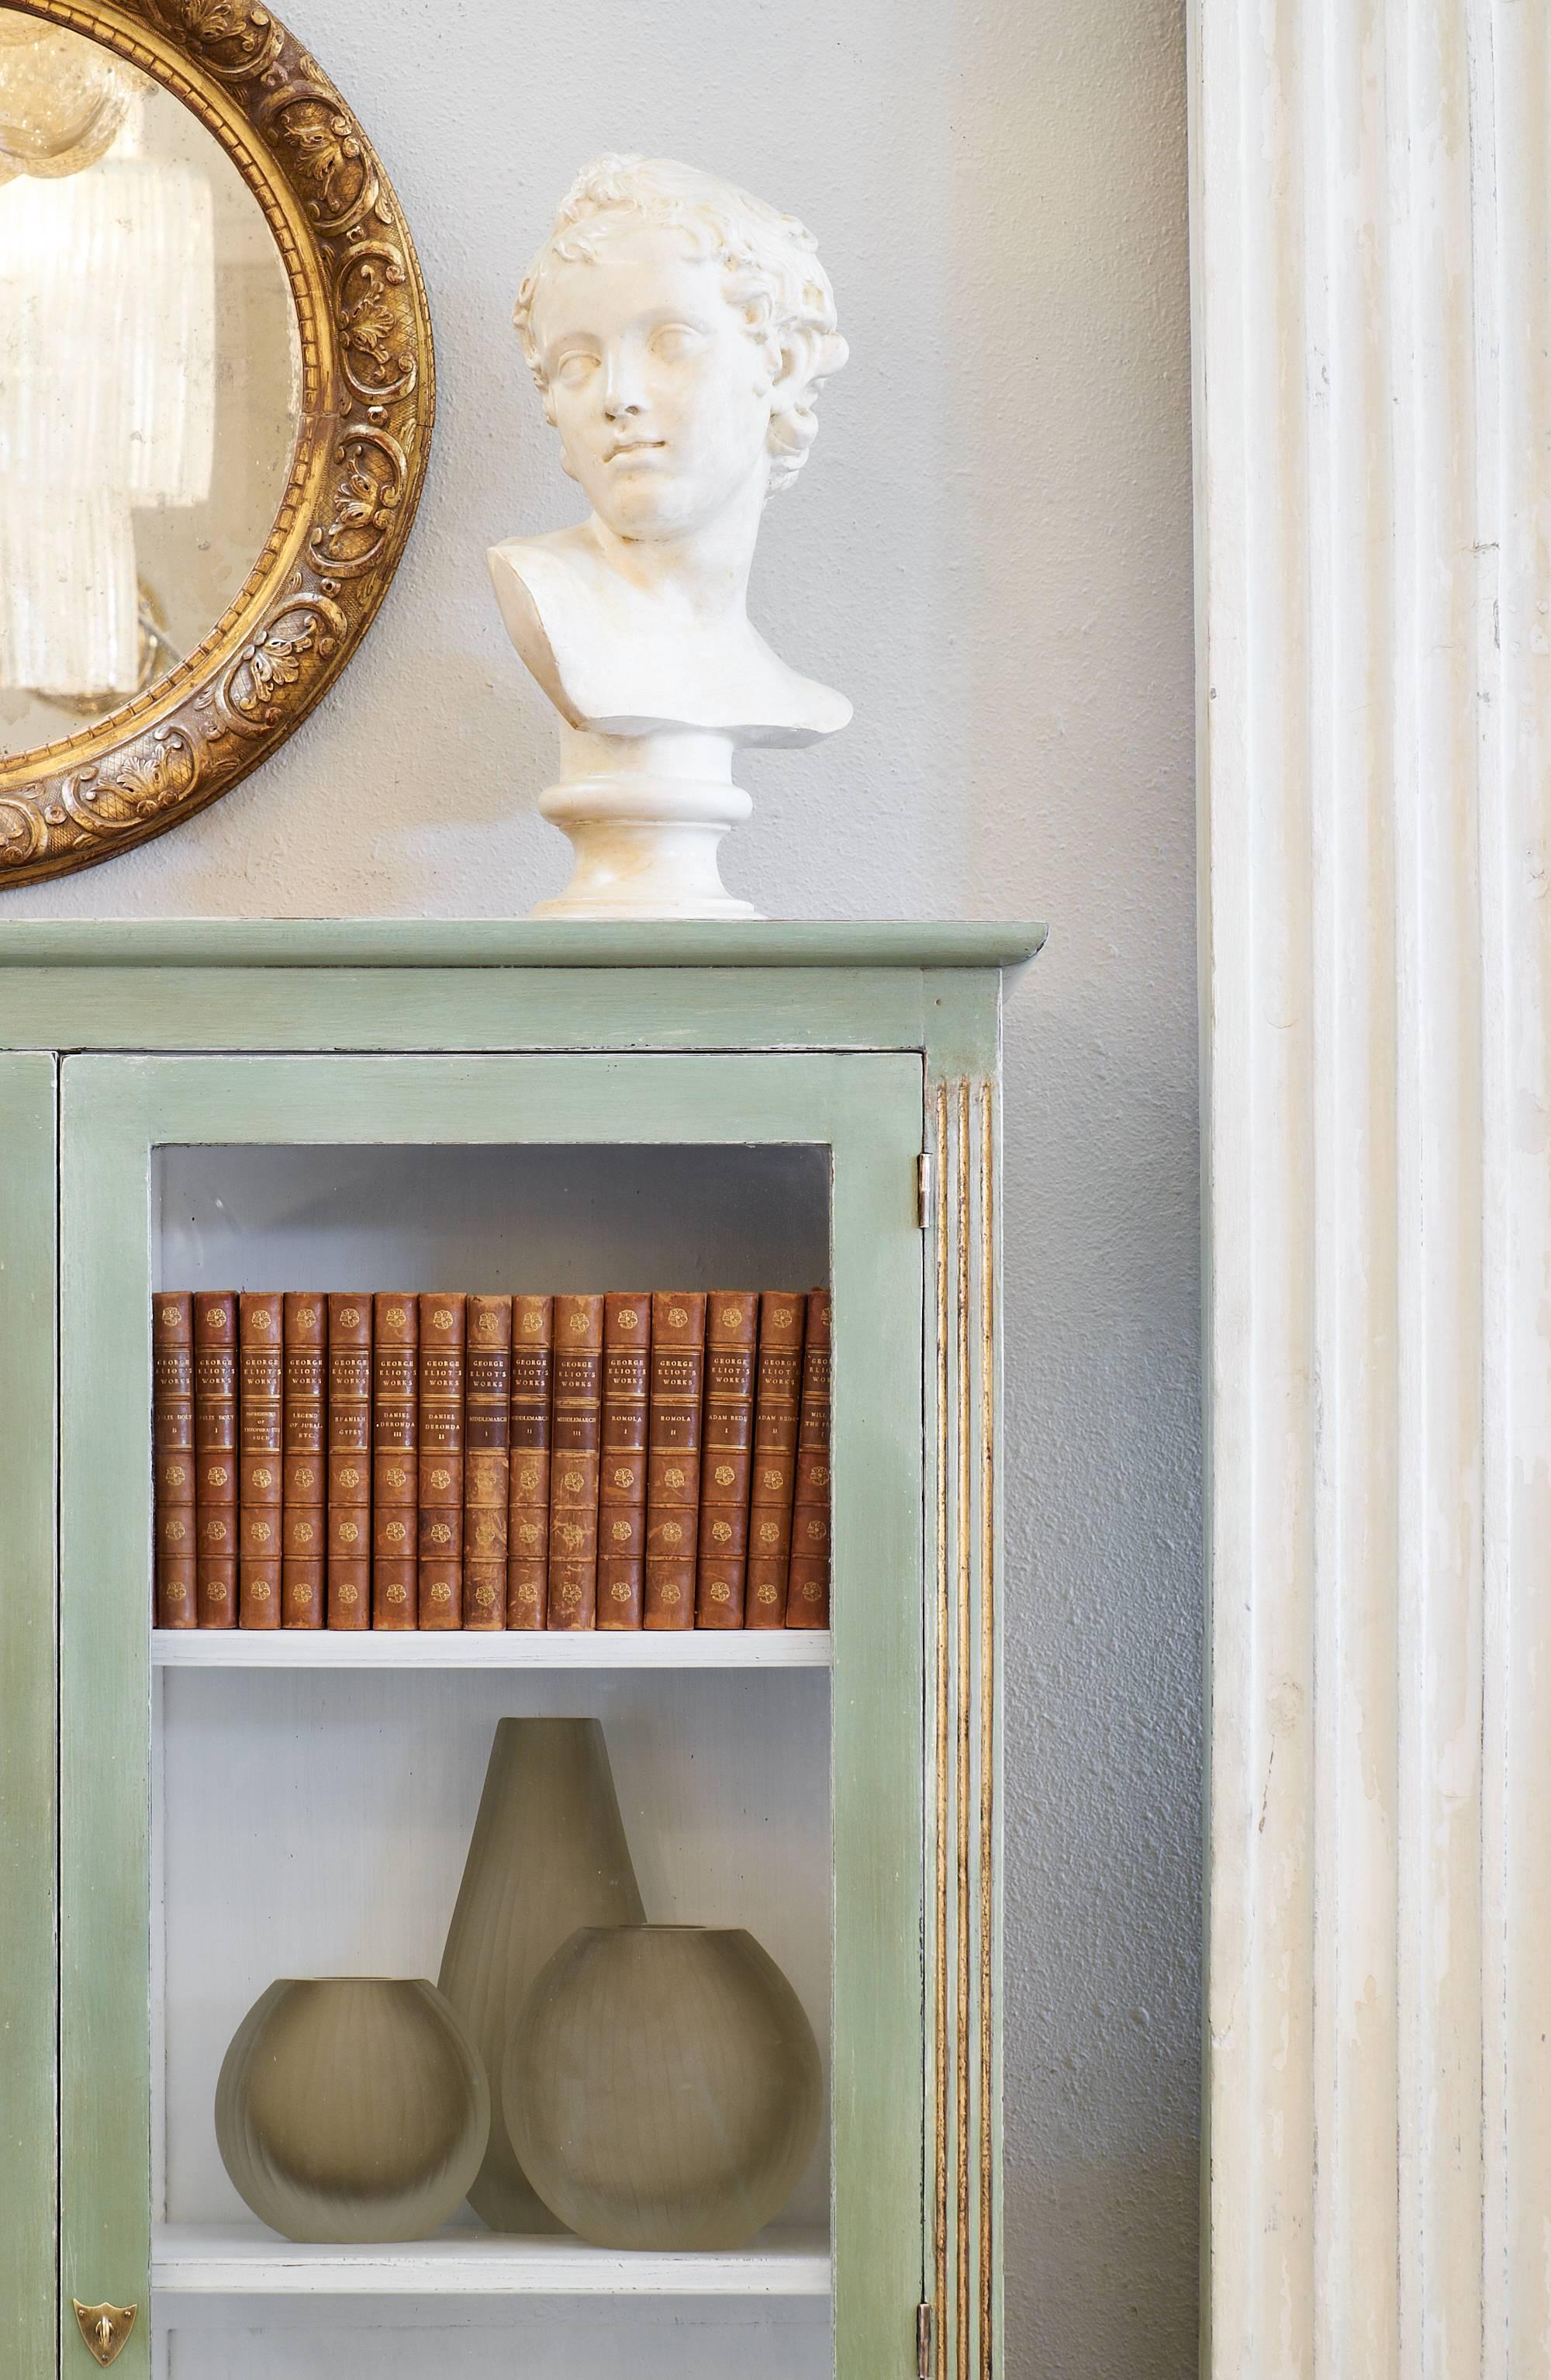 Louis XVI style bookcase of painted mahogany with gold leafed accents and fluting on the sides. This French antique piece has glass doors. Three adjustable shelves make this an efficient addition to many settings! This bookcase is a versatile and